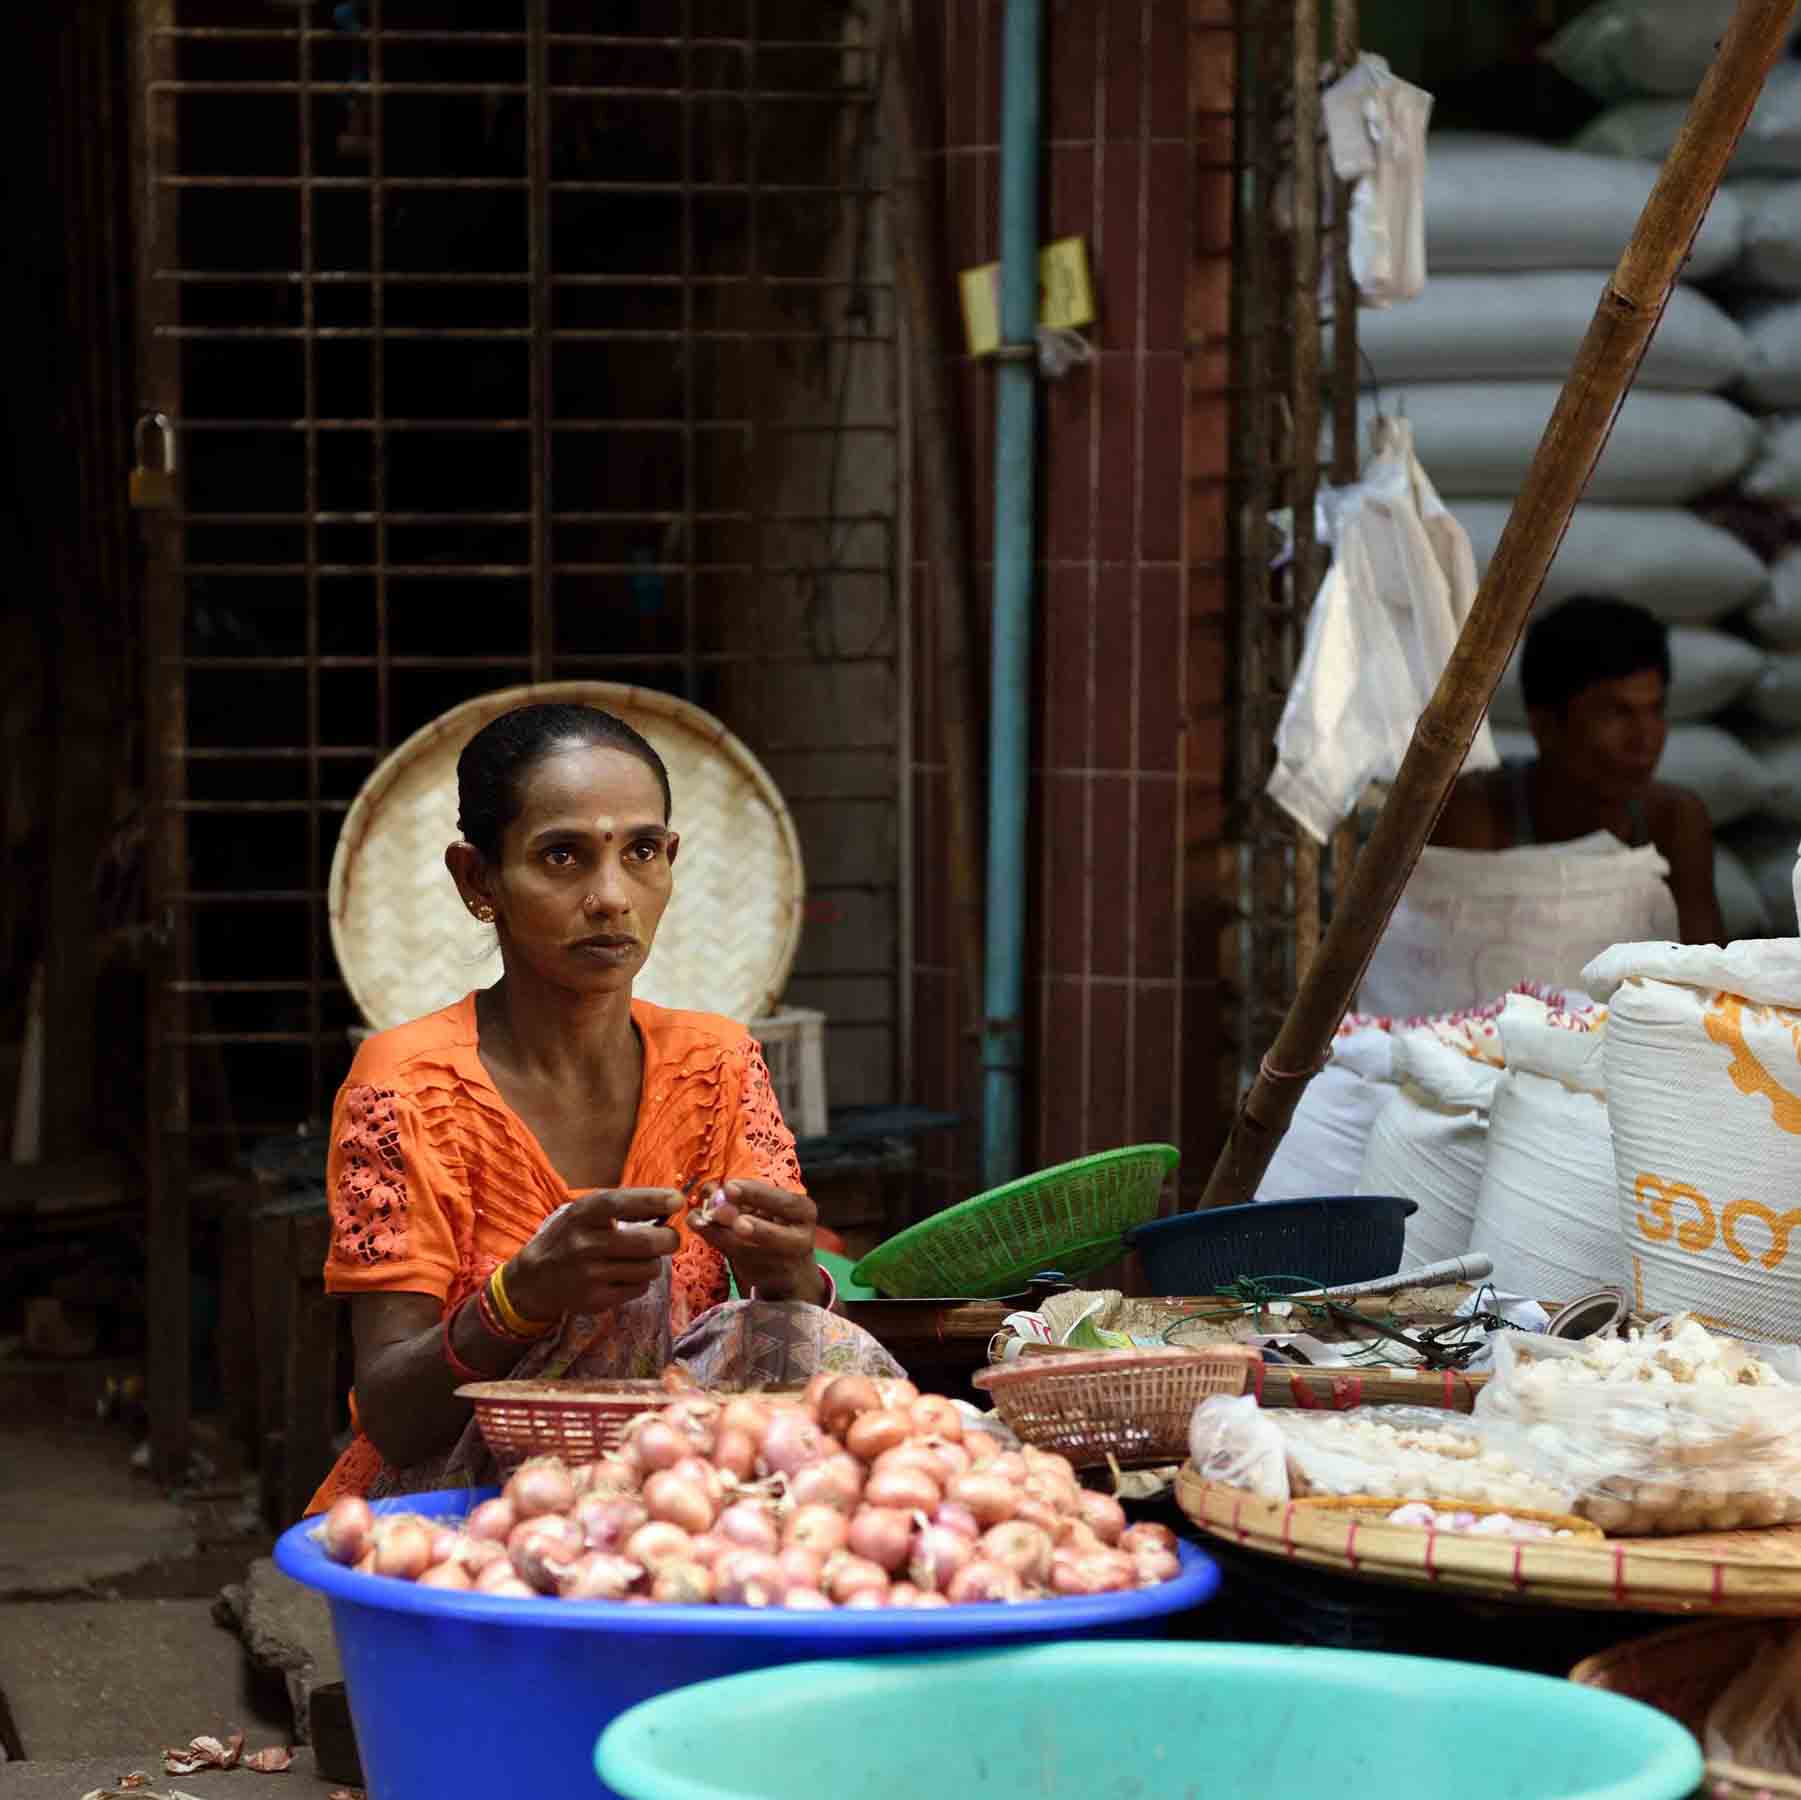 A Hindu woman of south Asian descent selling garlic and onions at a bustling morning market. During the colonial era, the British government waived ferry fees to encourage labor migration from India into Burma’s fallow delta region. Today, Yangon remains a diverse city with trade frequently divided along ethnic lines. (Photo: Naomi Hellmann)